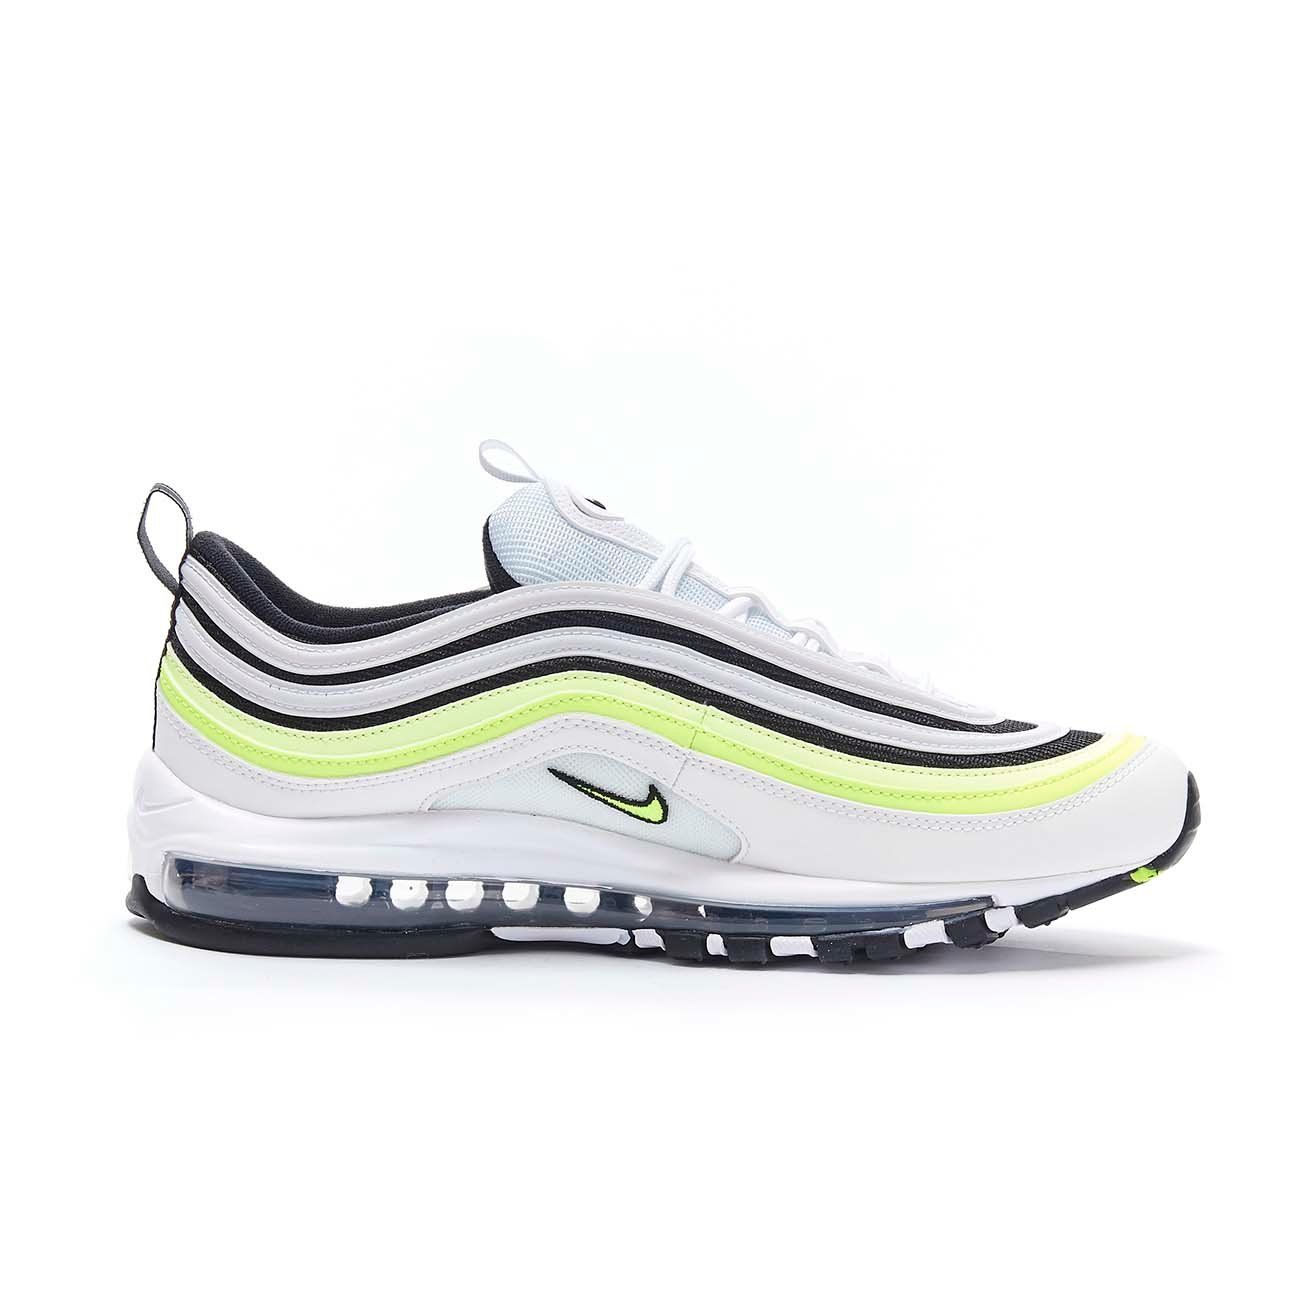 air max 97 bianche gialle